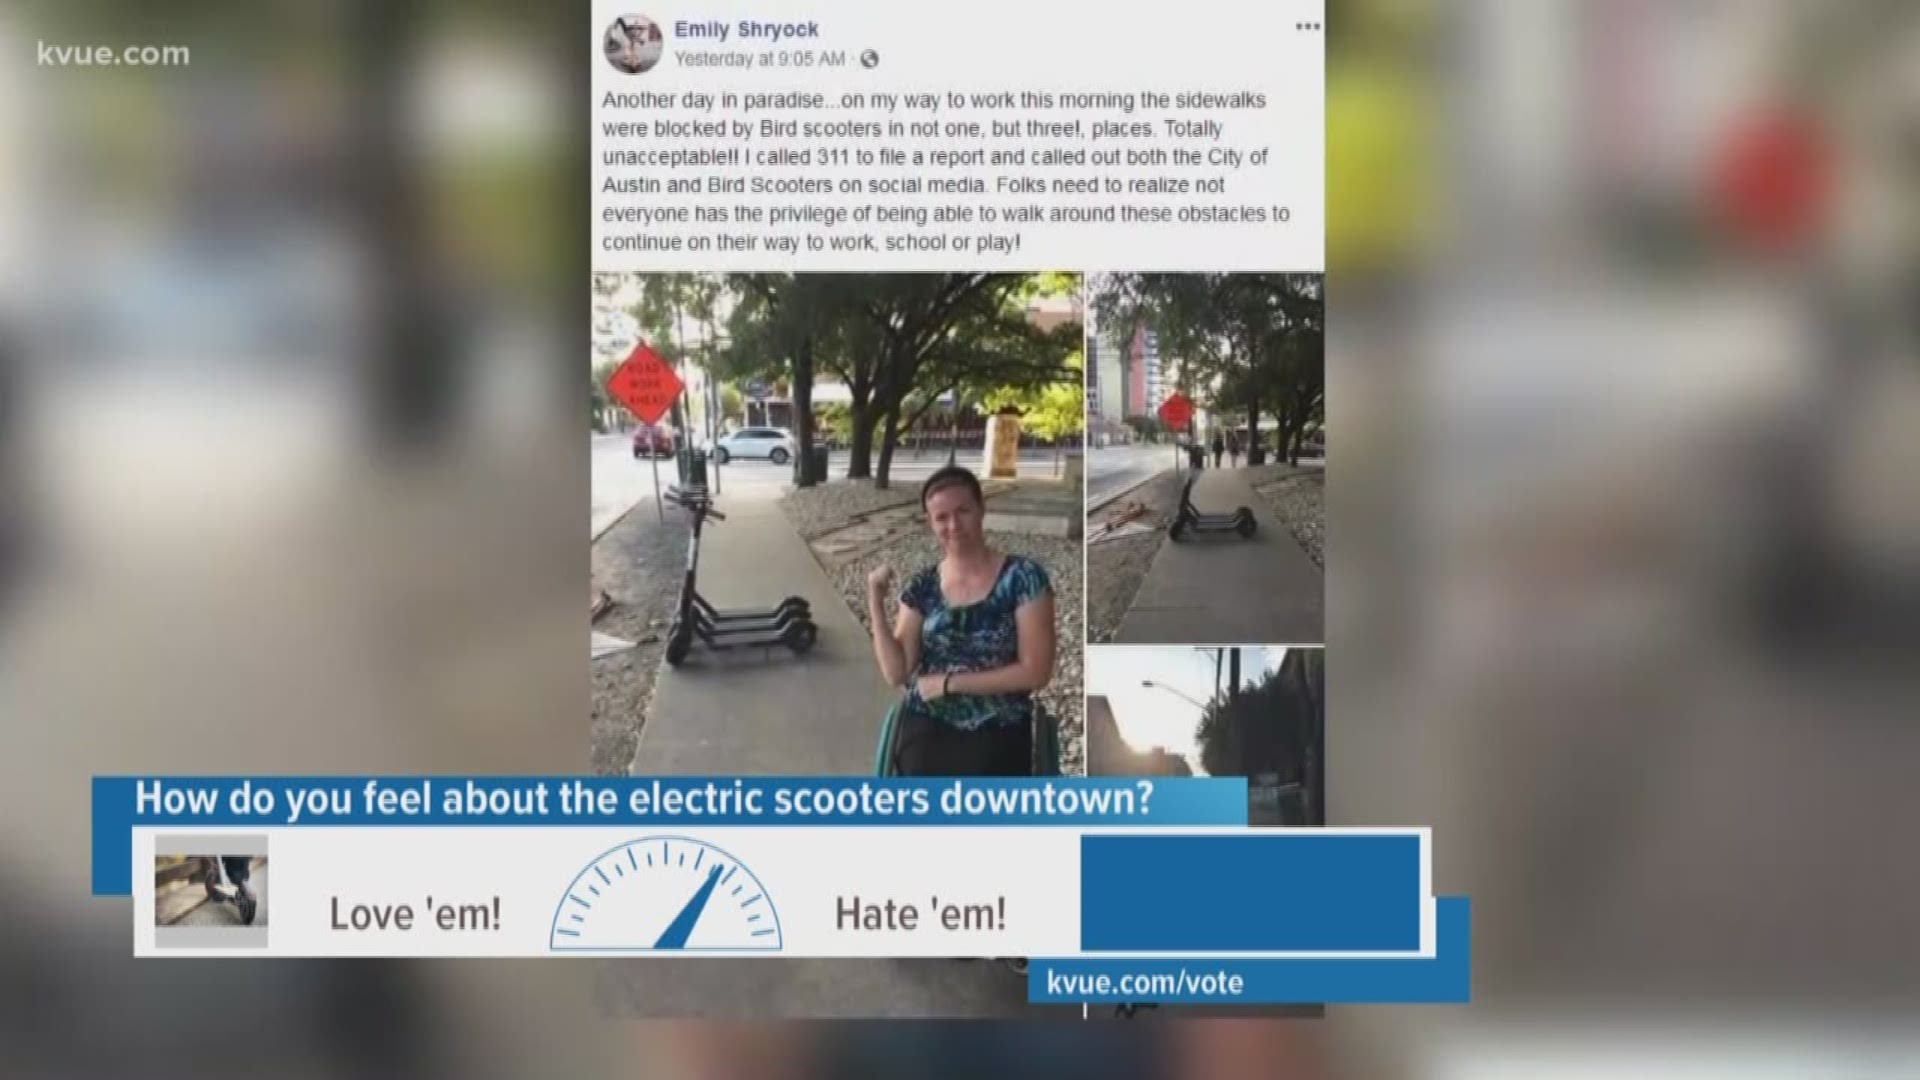 For some, electric scooters left downtown are causing a nuisance.